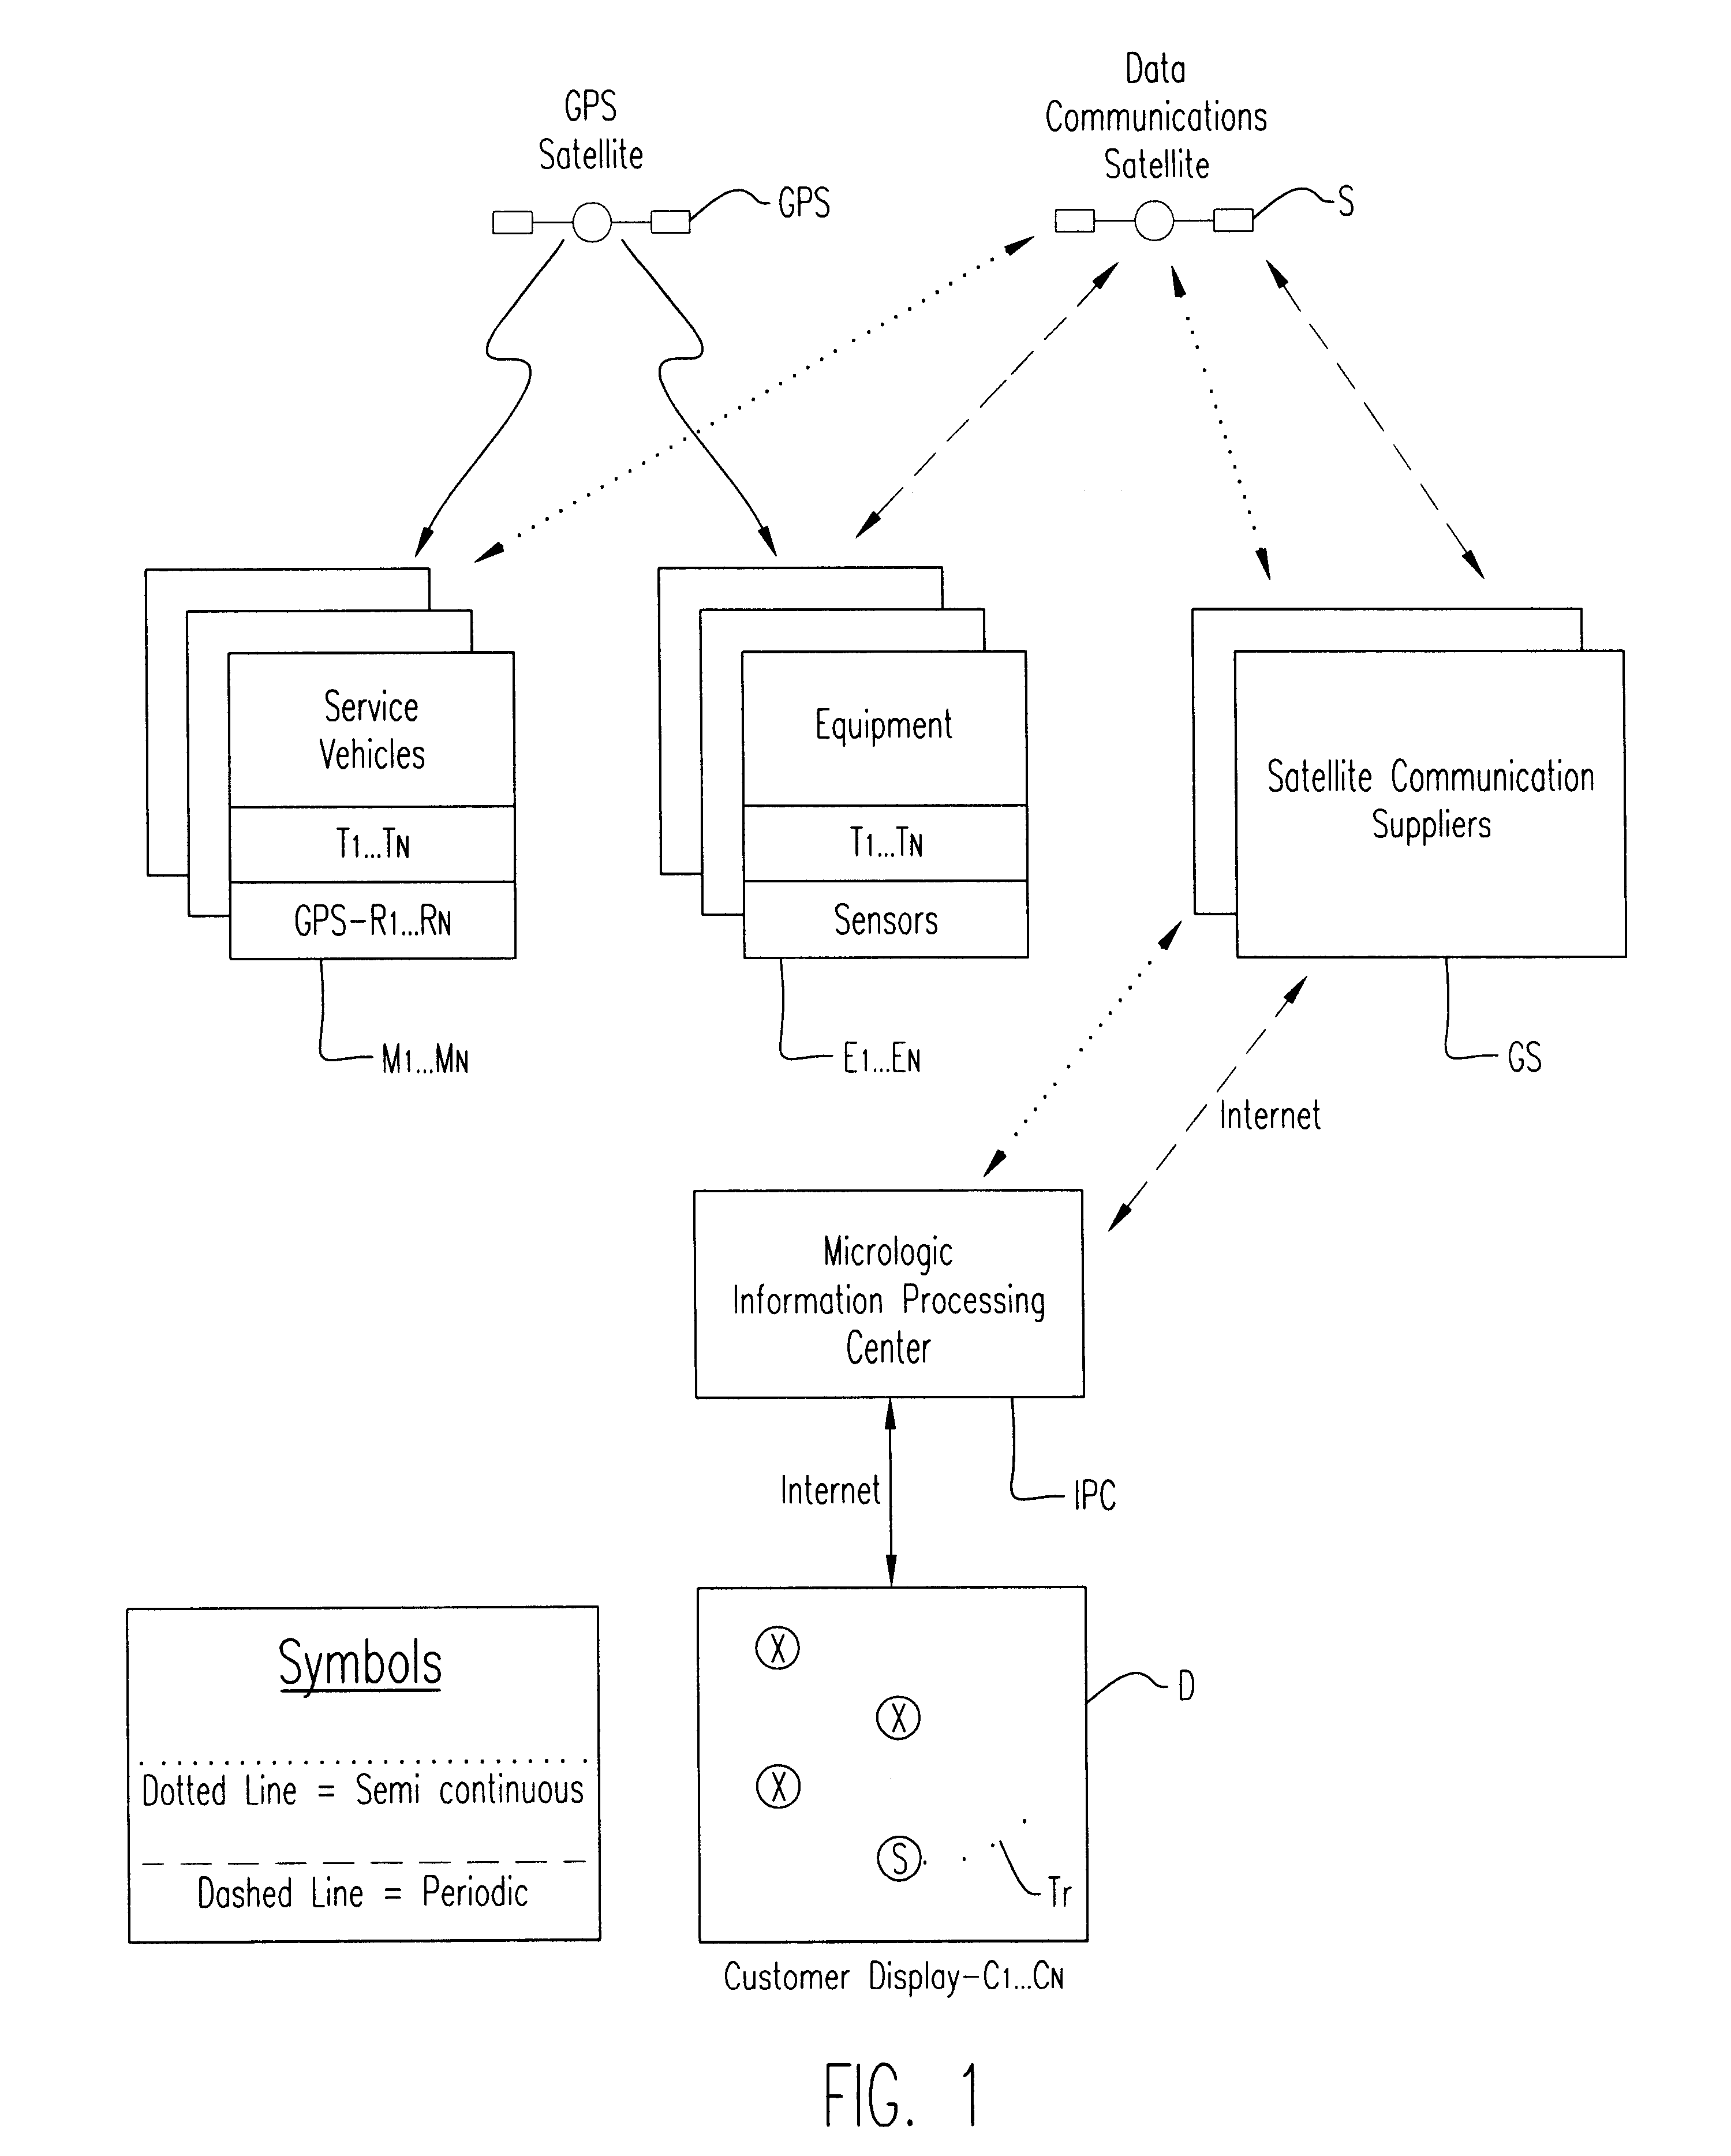 Method of and system and apparatus for integrating maintenance vehicle and service personnel tracking information with the remote monitoring of the location, status, utilization and condition of widely geographically dispersed fleets of vehicular construction equipment and the like to be maintained, and providing and displaying together both construction and maintenance vehicle information